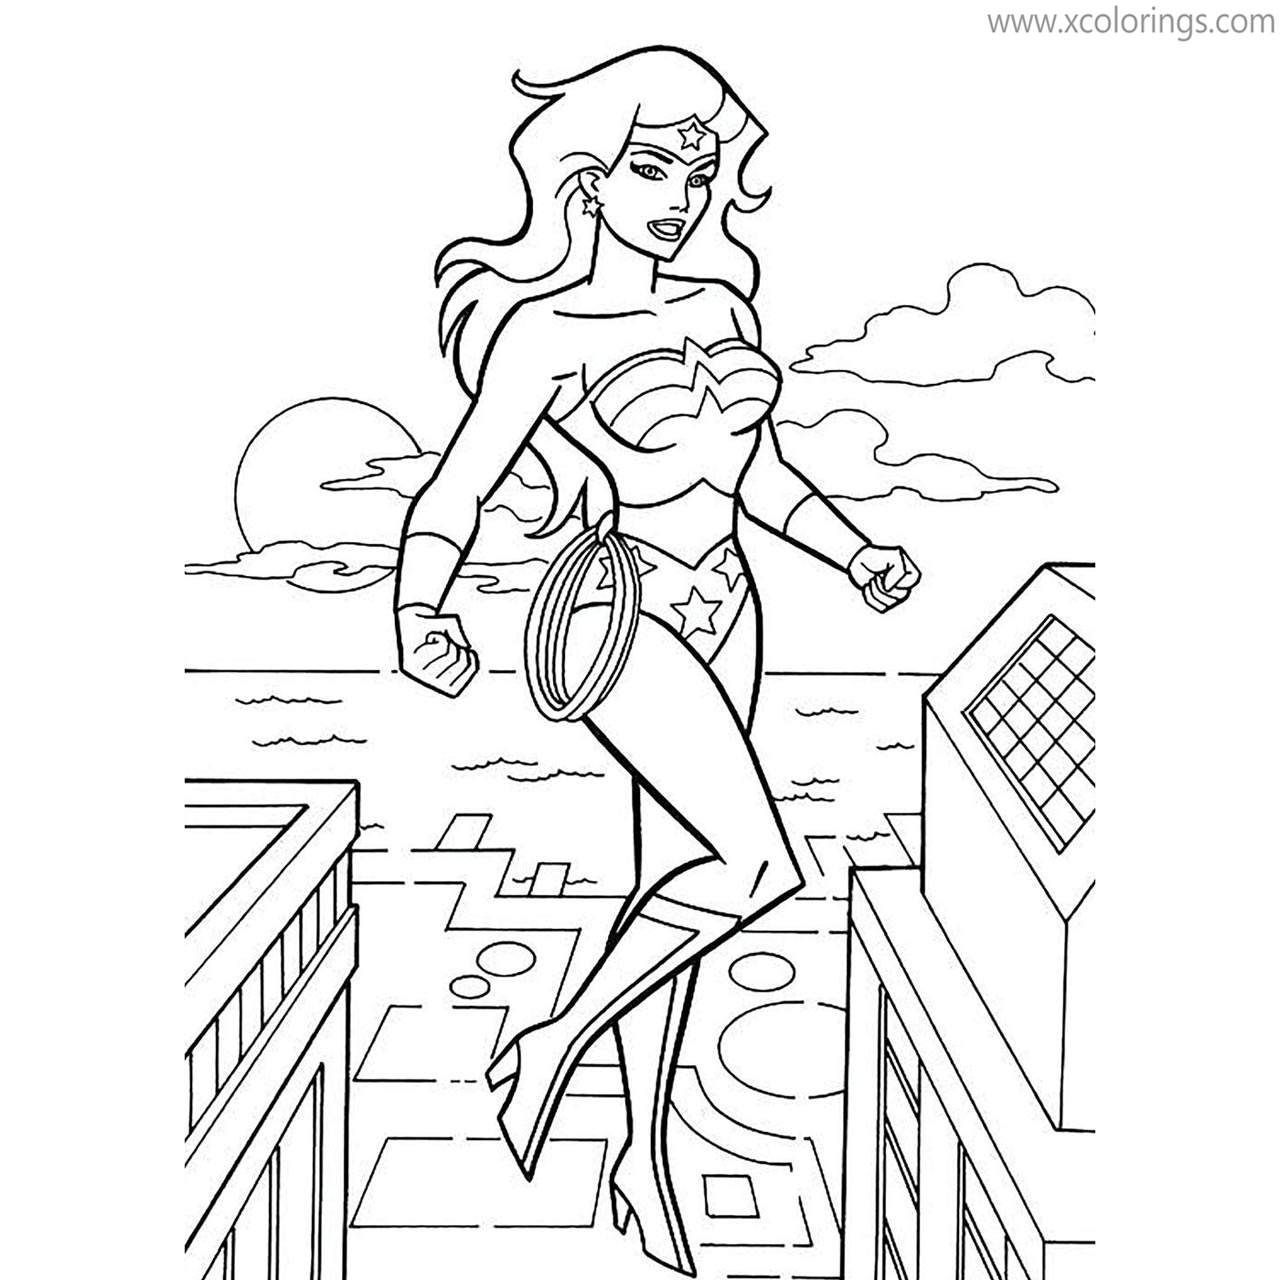 Free Animated Wonder Woman Coloring Pages Up in the Air printable